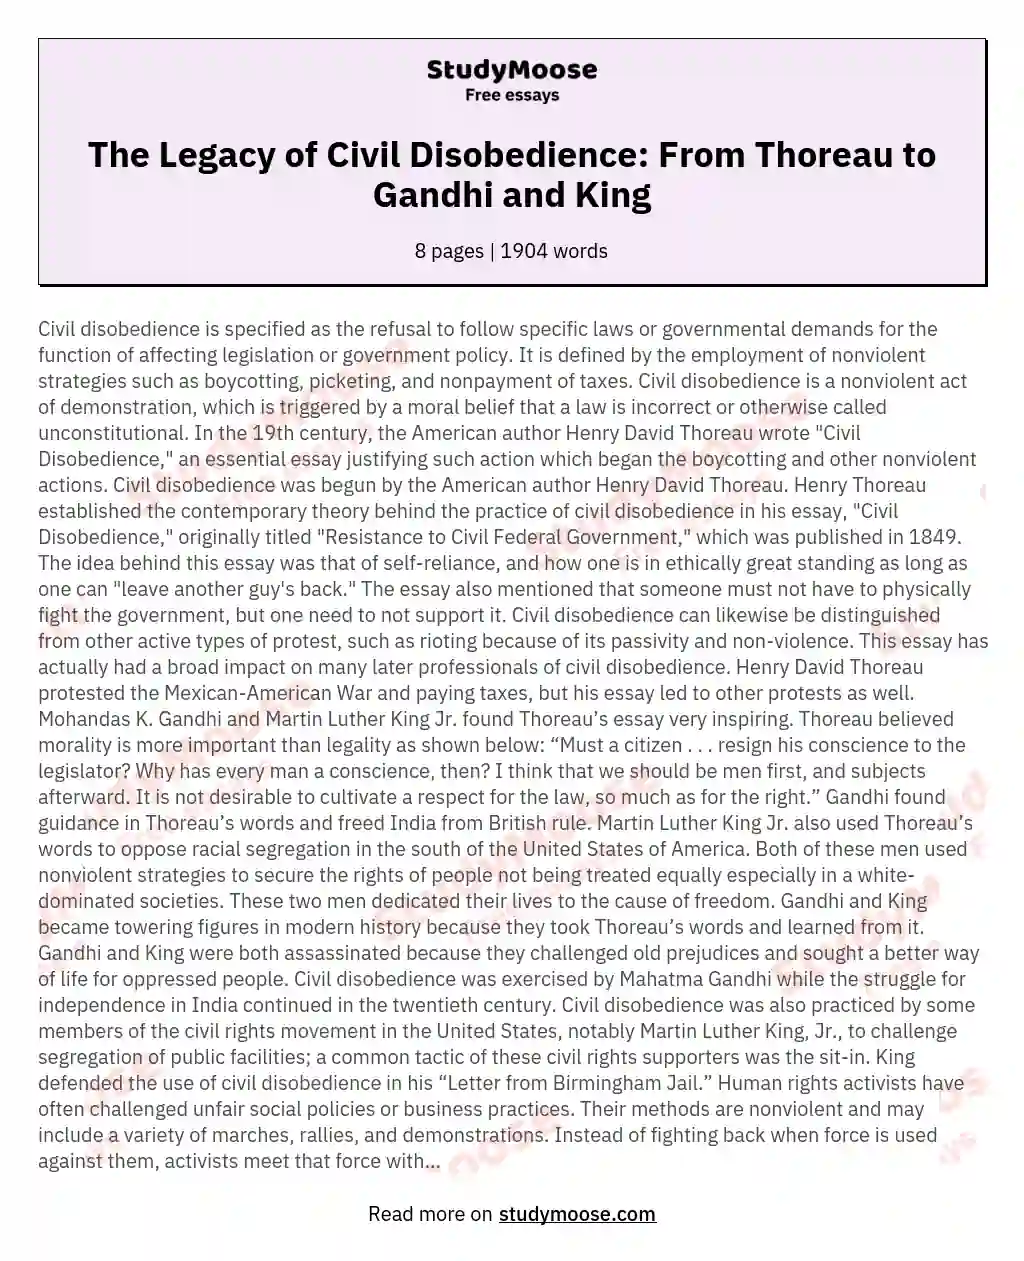 civil disobedience thesis statement